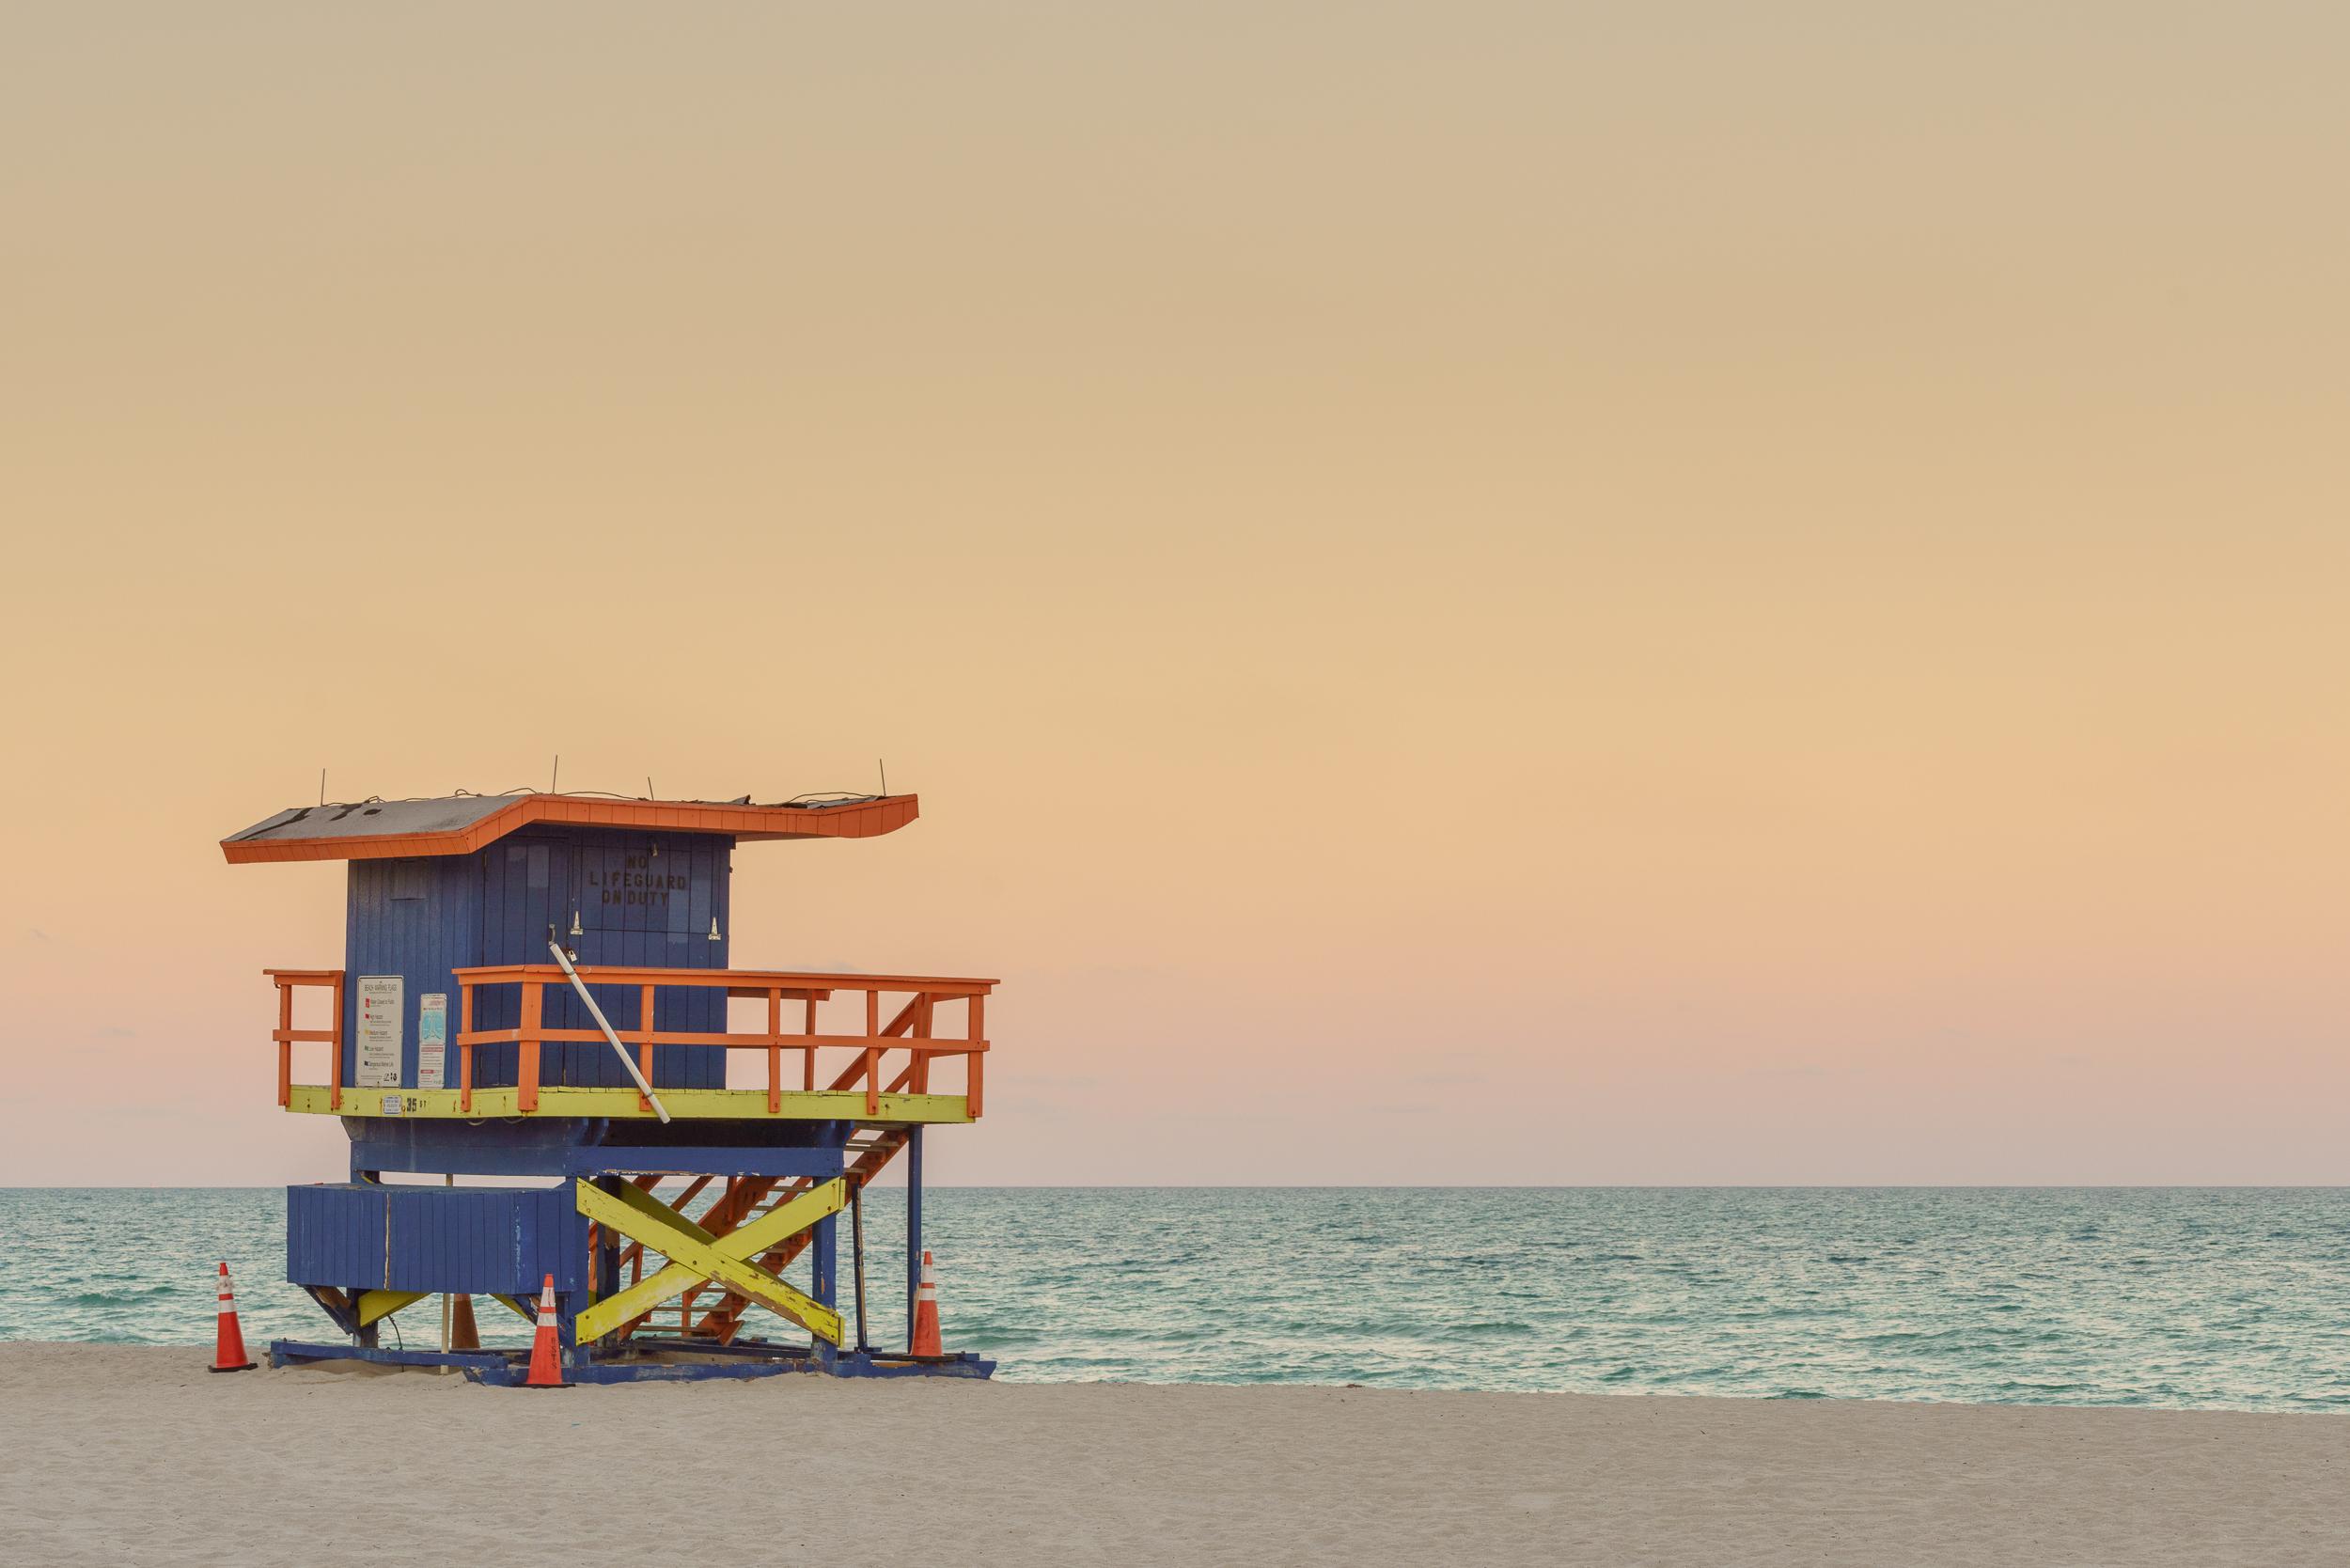 Peter Mendelson Color Photograph - "35th St. Miami Lifeguard Stand at Sunset, " Contemporary Photograph, 30" x 45"